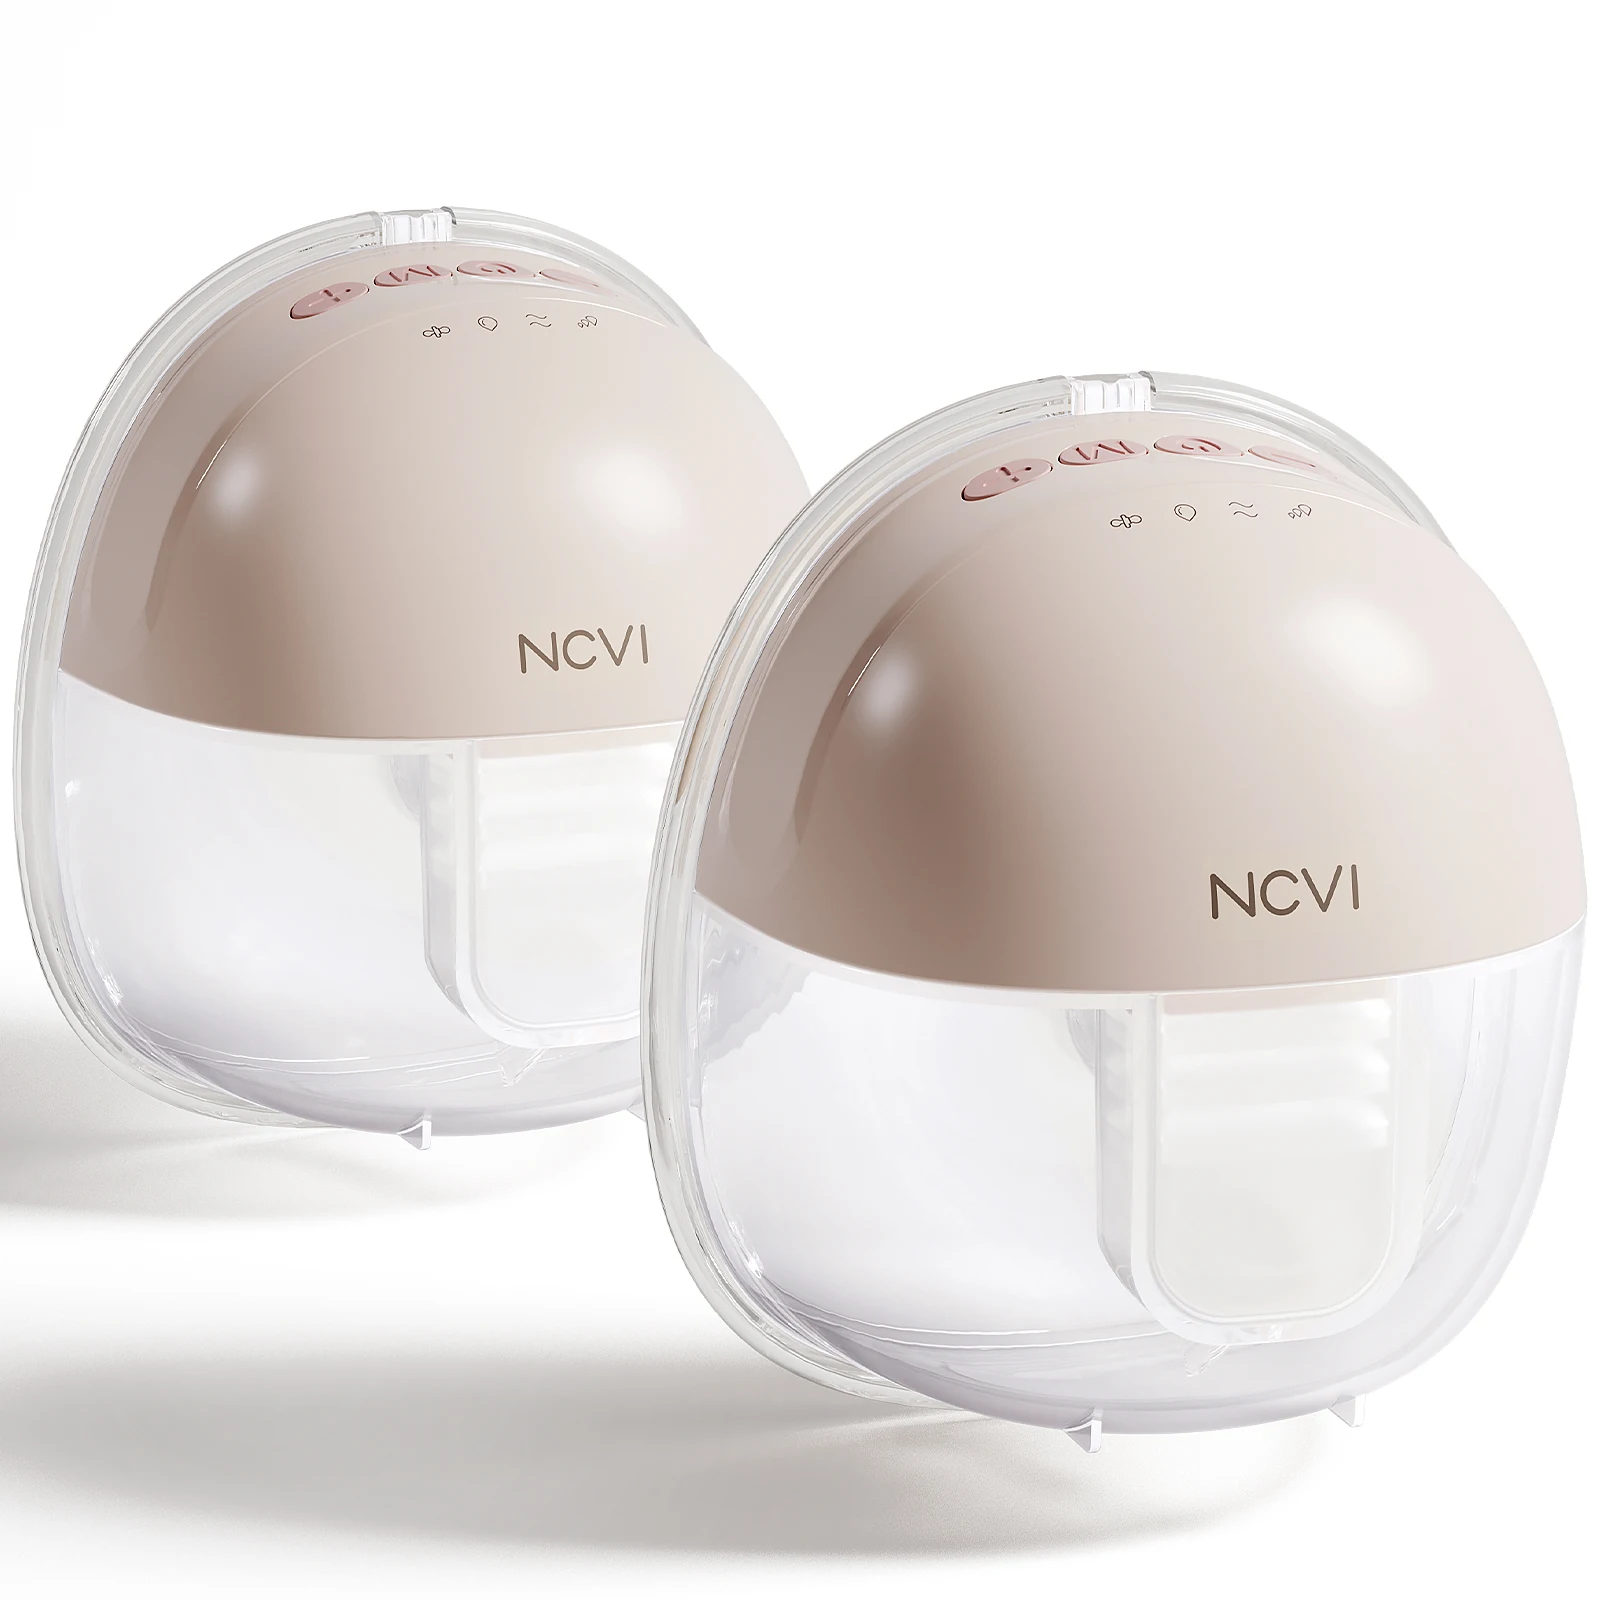 

NCVI Wearable Electric Breast Pump 8111, Portable Wireless Pump with 4 Modes & 9 Levels, Double Pumps with 21/24mm Flanges